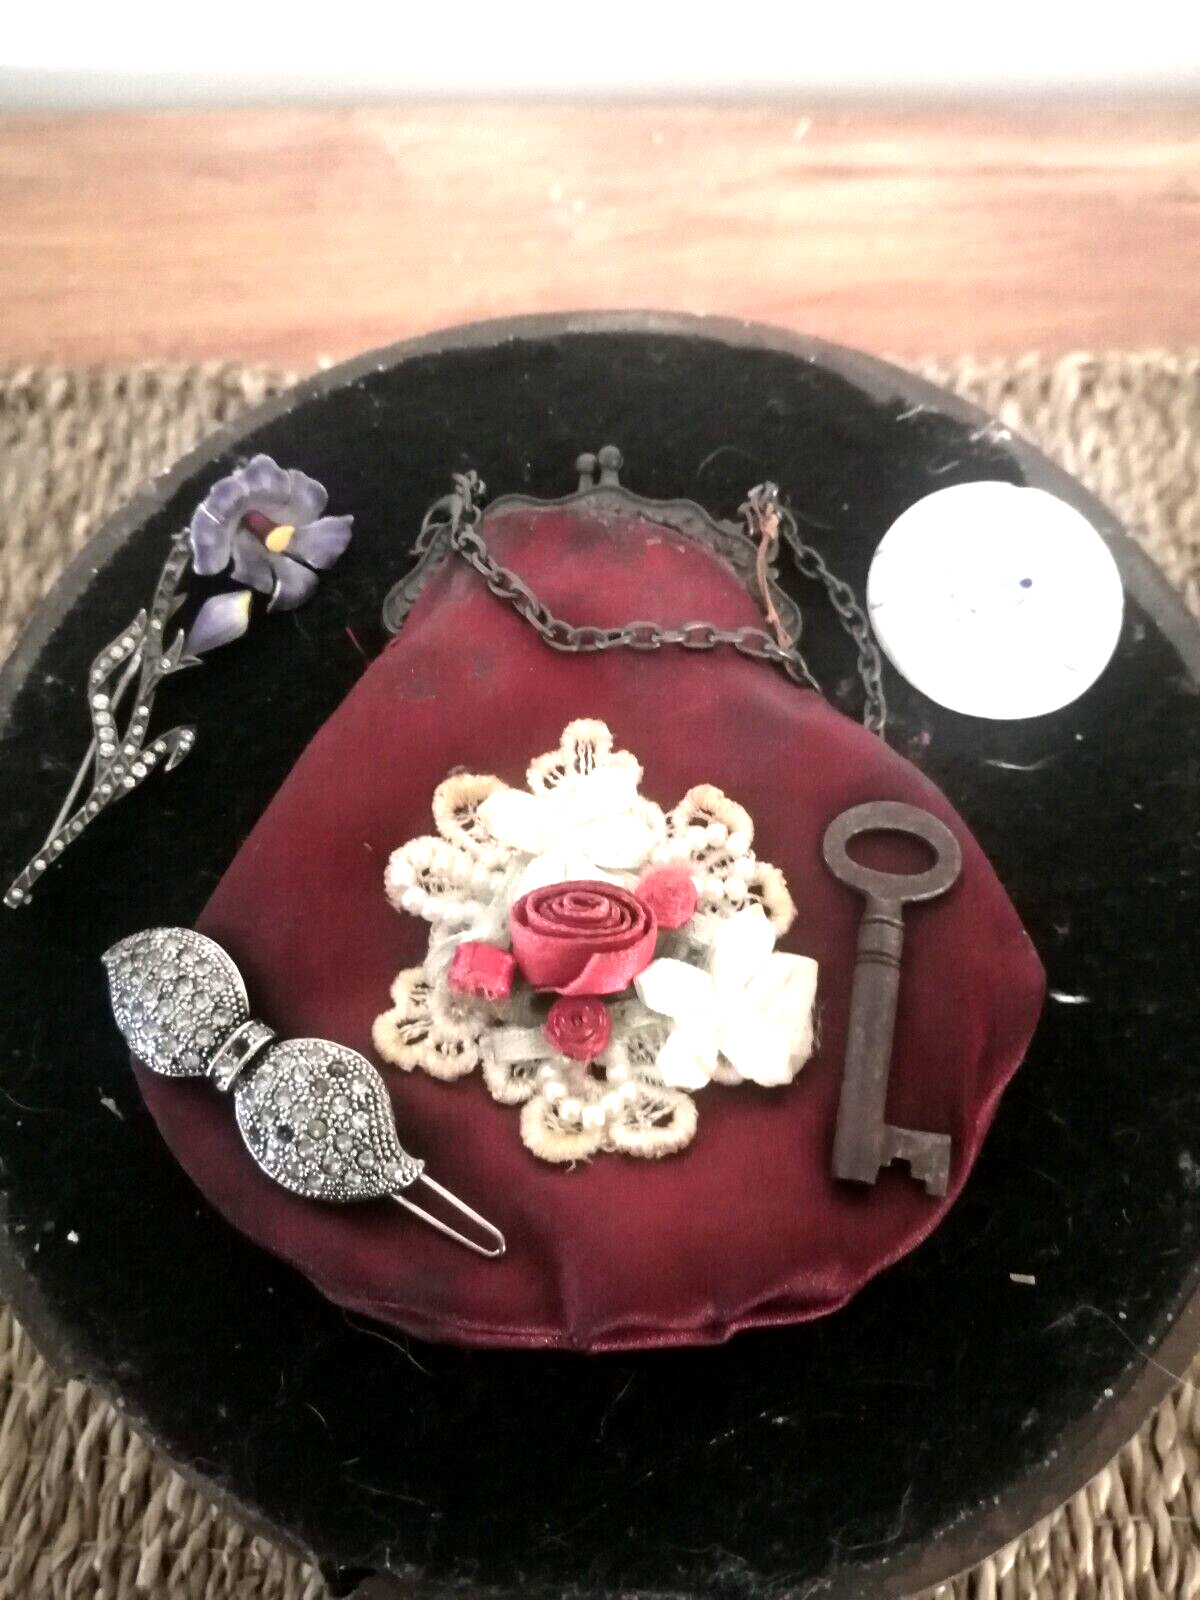 Victorian Haunted Silk Purse Containing Her Personal Items, Positive Energy